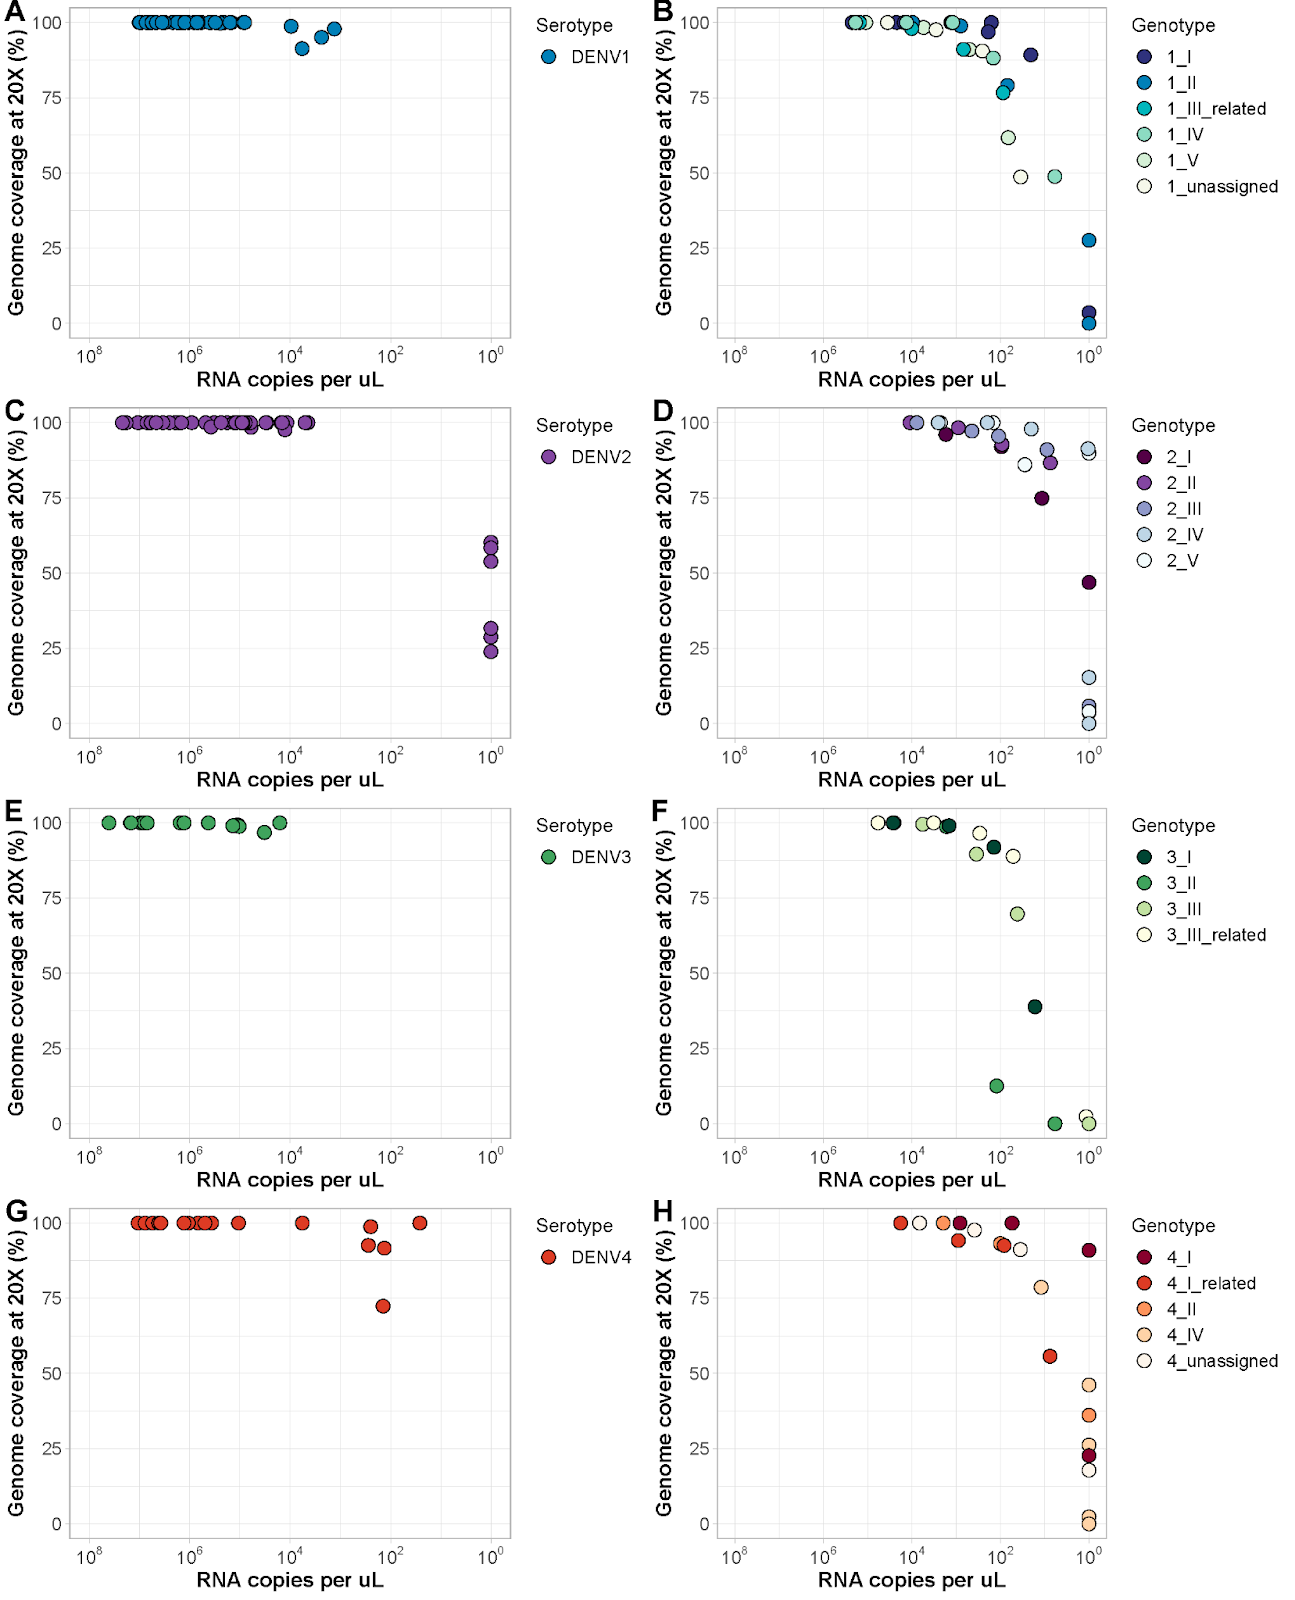 Figure 2: Pan-serotype primers - Percent genome coverage of undiluted and diluted dengue virus stocks sequenced with the pan-serotype dengue virus amplicon-based sequencing approach. The same dengue viruses as shown in Figure 1 were sequenced, by using the pan-serotype approach. The four individual primer schemes were mixed for use as a single universal pan-serotype dengue virus scheme. Consensus genomes were generated at a depth of coverage of 20X using iVar (version 1.3.1). Genome coverage at 20X for undiluted dengue virus serotype 1 (A), 2 (C), 3 (E), and 4 (G) virus stocks. Each dot represents a different dengue virus stock. Genome coverage at 20X for selected dengue virus serotype 1 (B), 2 (D), 3 (F), and 4 (H) virus stocks diluted until no longer detected by the CDC real-time RT-PCR assay. Dots represent dengue virus stocks diluted to different concentrations. Some samples have high coverage, while not detected by the real-time RT-PCR assay, which is due to mismatches with the primer or probe sequences (lower sensitivity).